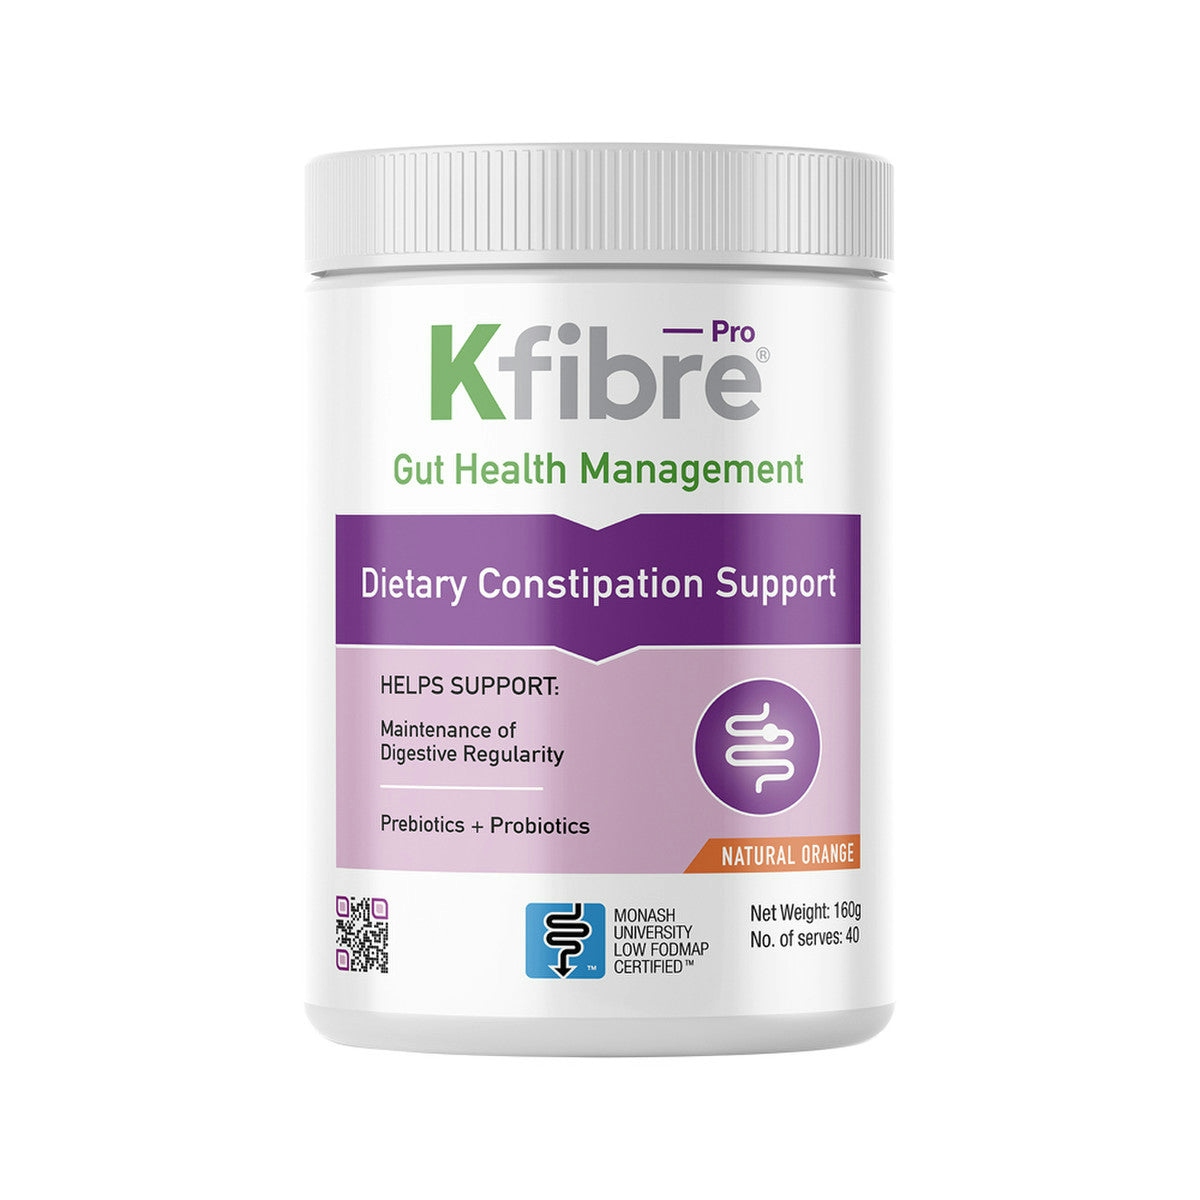 image of Kfibre Pro Dietary Constipation Support Natural Orange Tub 160g with white background